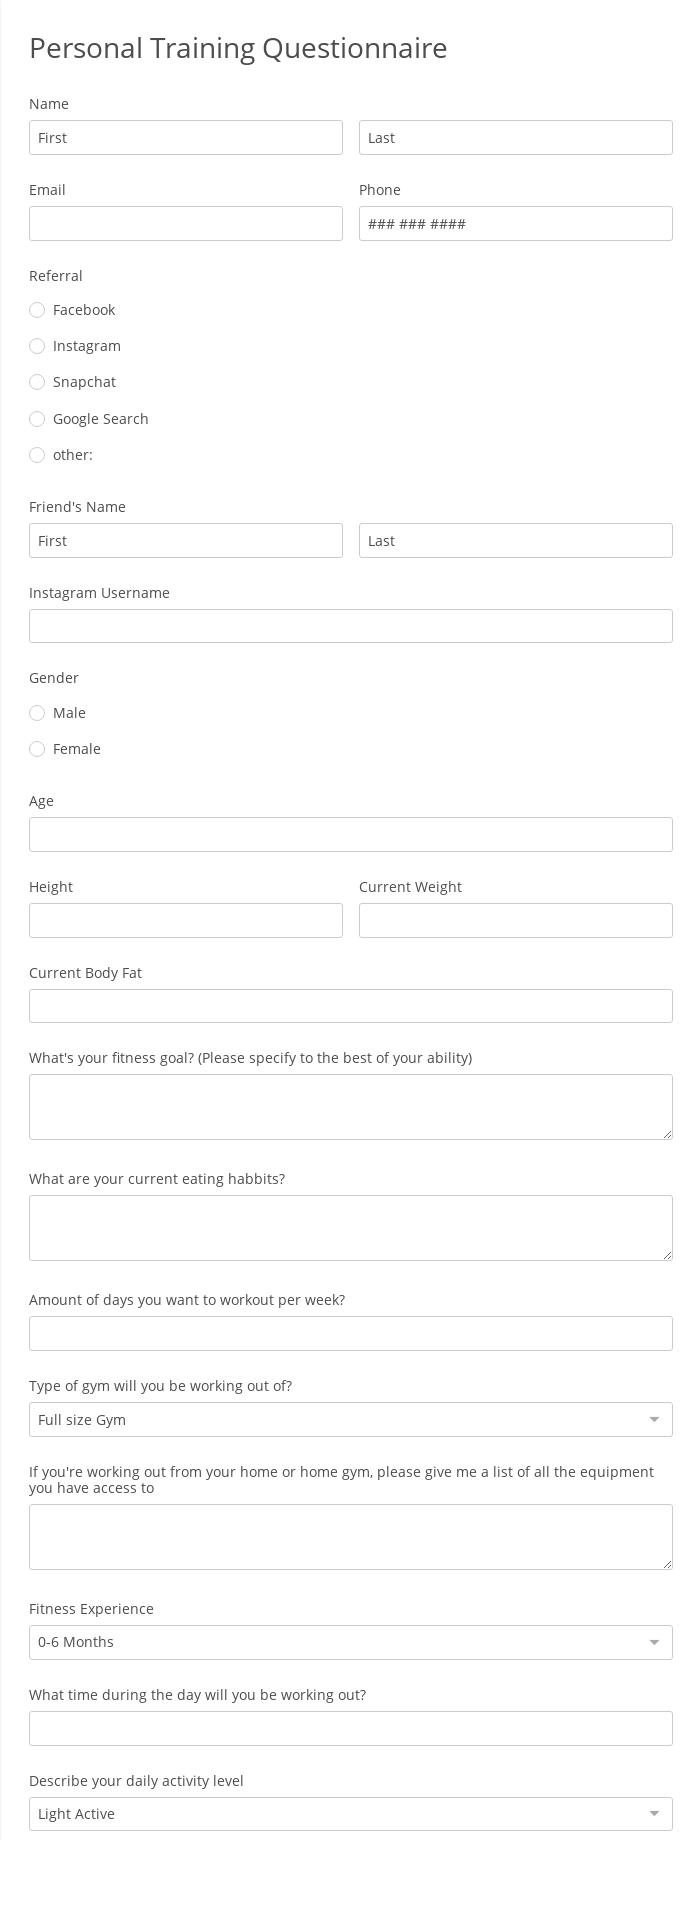 Personal Training Questionnaire